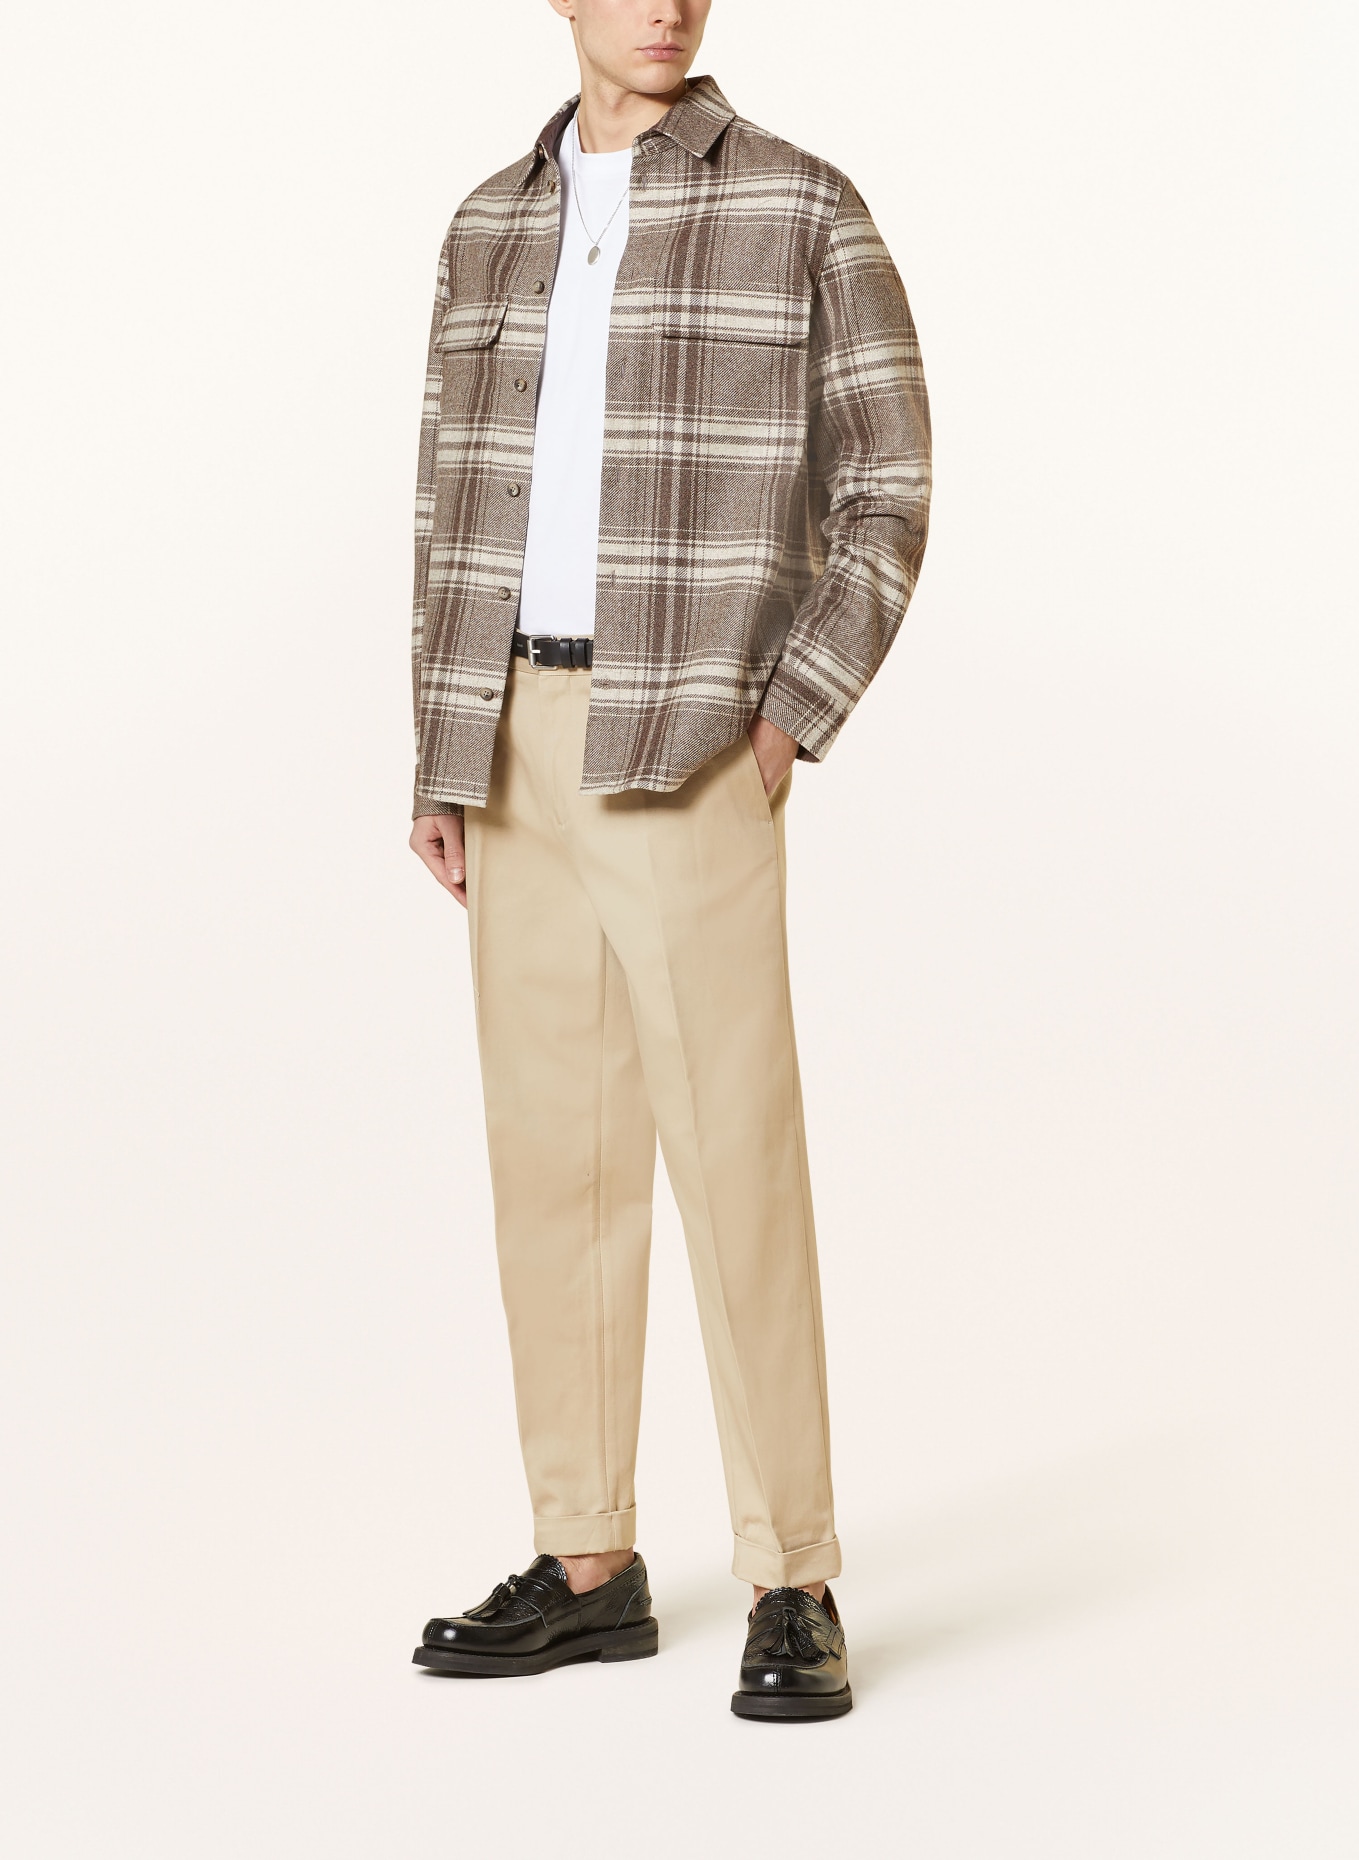 COS Flannel shirt relaxed fit, Color: BEIGE/ BROWN/ DARK BROWN (Image 2)